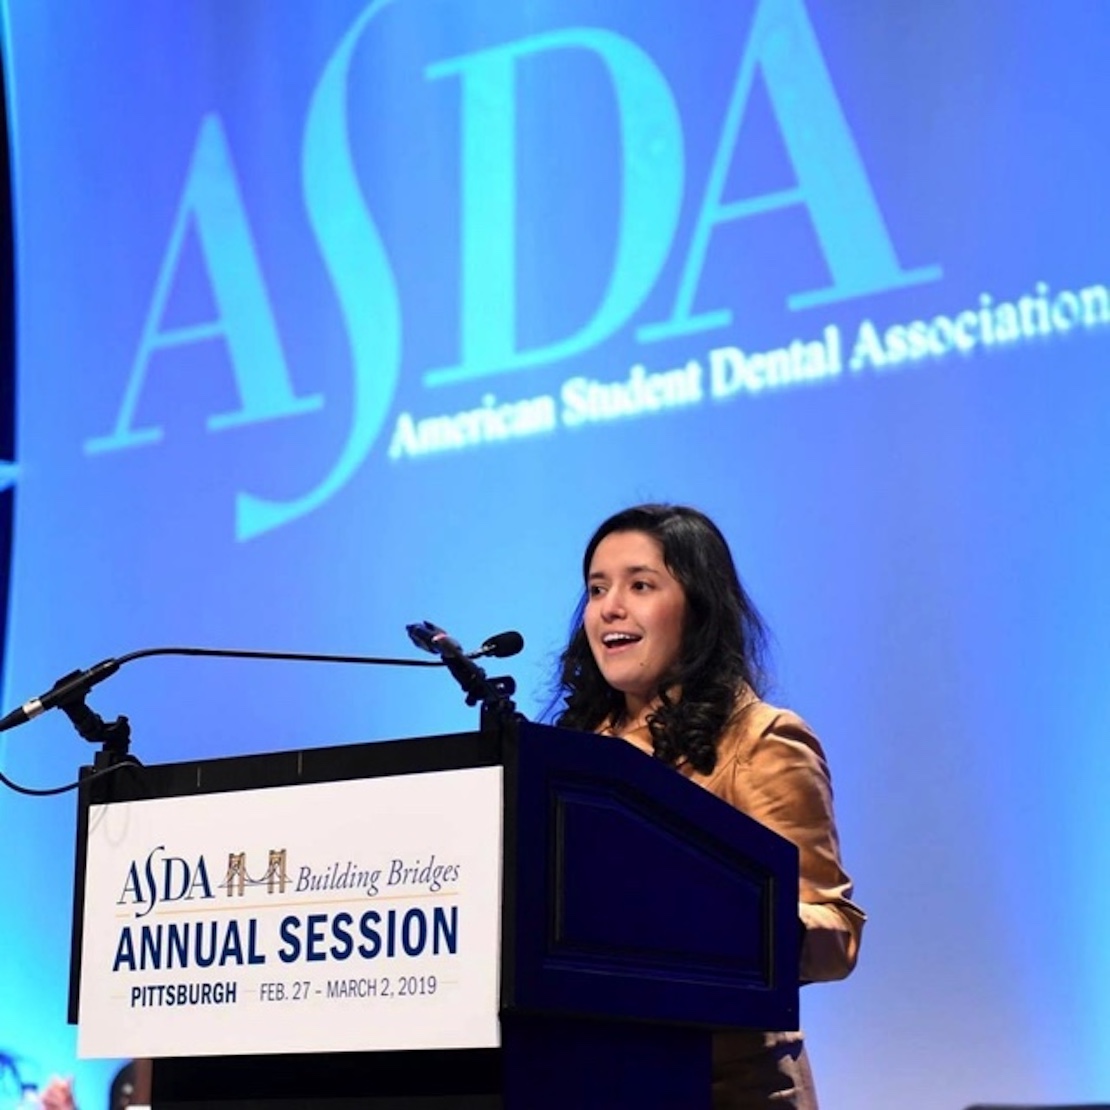 Tanya Sue Maestas, D.D.S. speaks during the ASDA Annual Session 2019 in Pittsburgh.